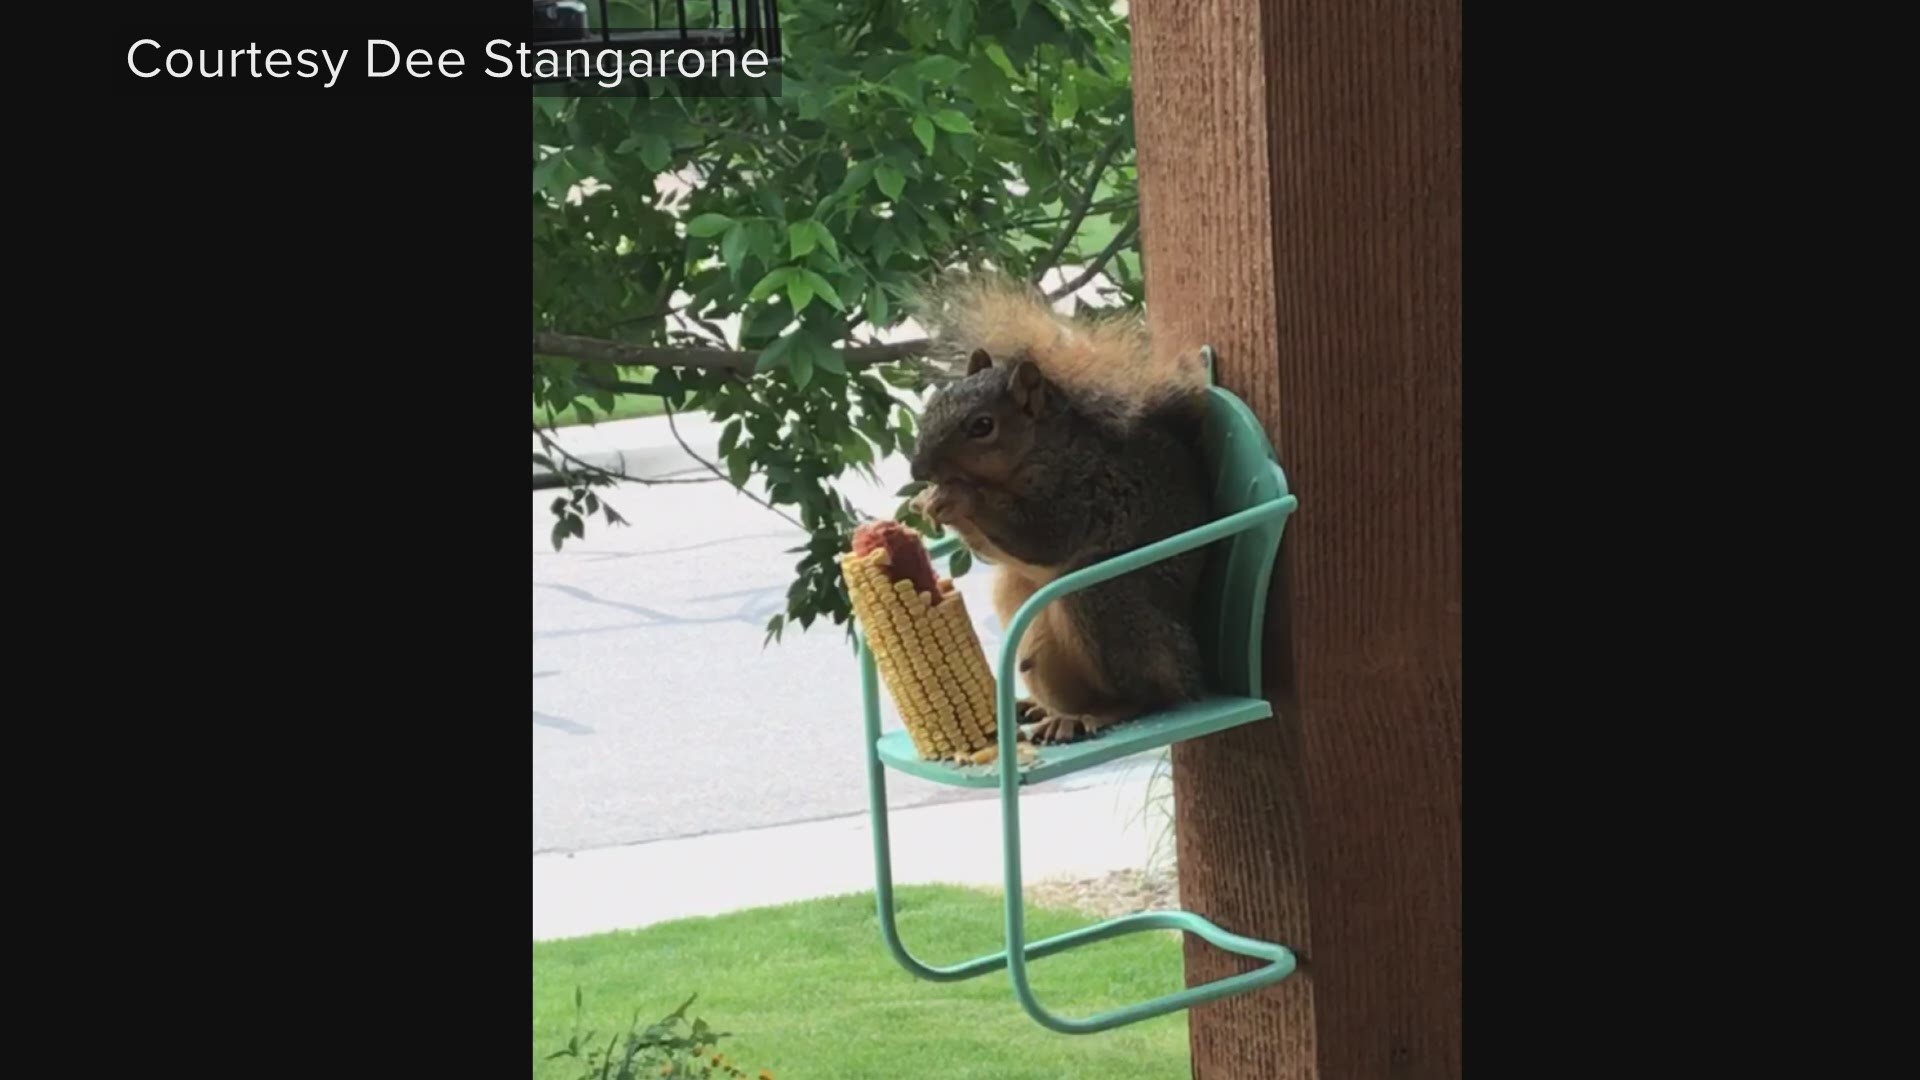 A 9NEWS viewer didn't think the squirrel chair would work. BOY IT DID.